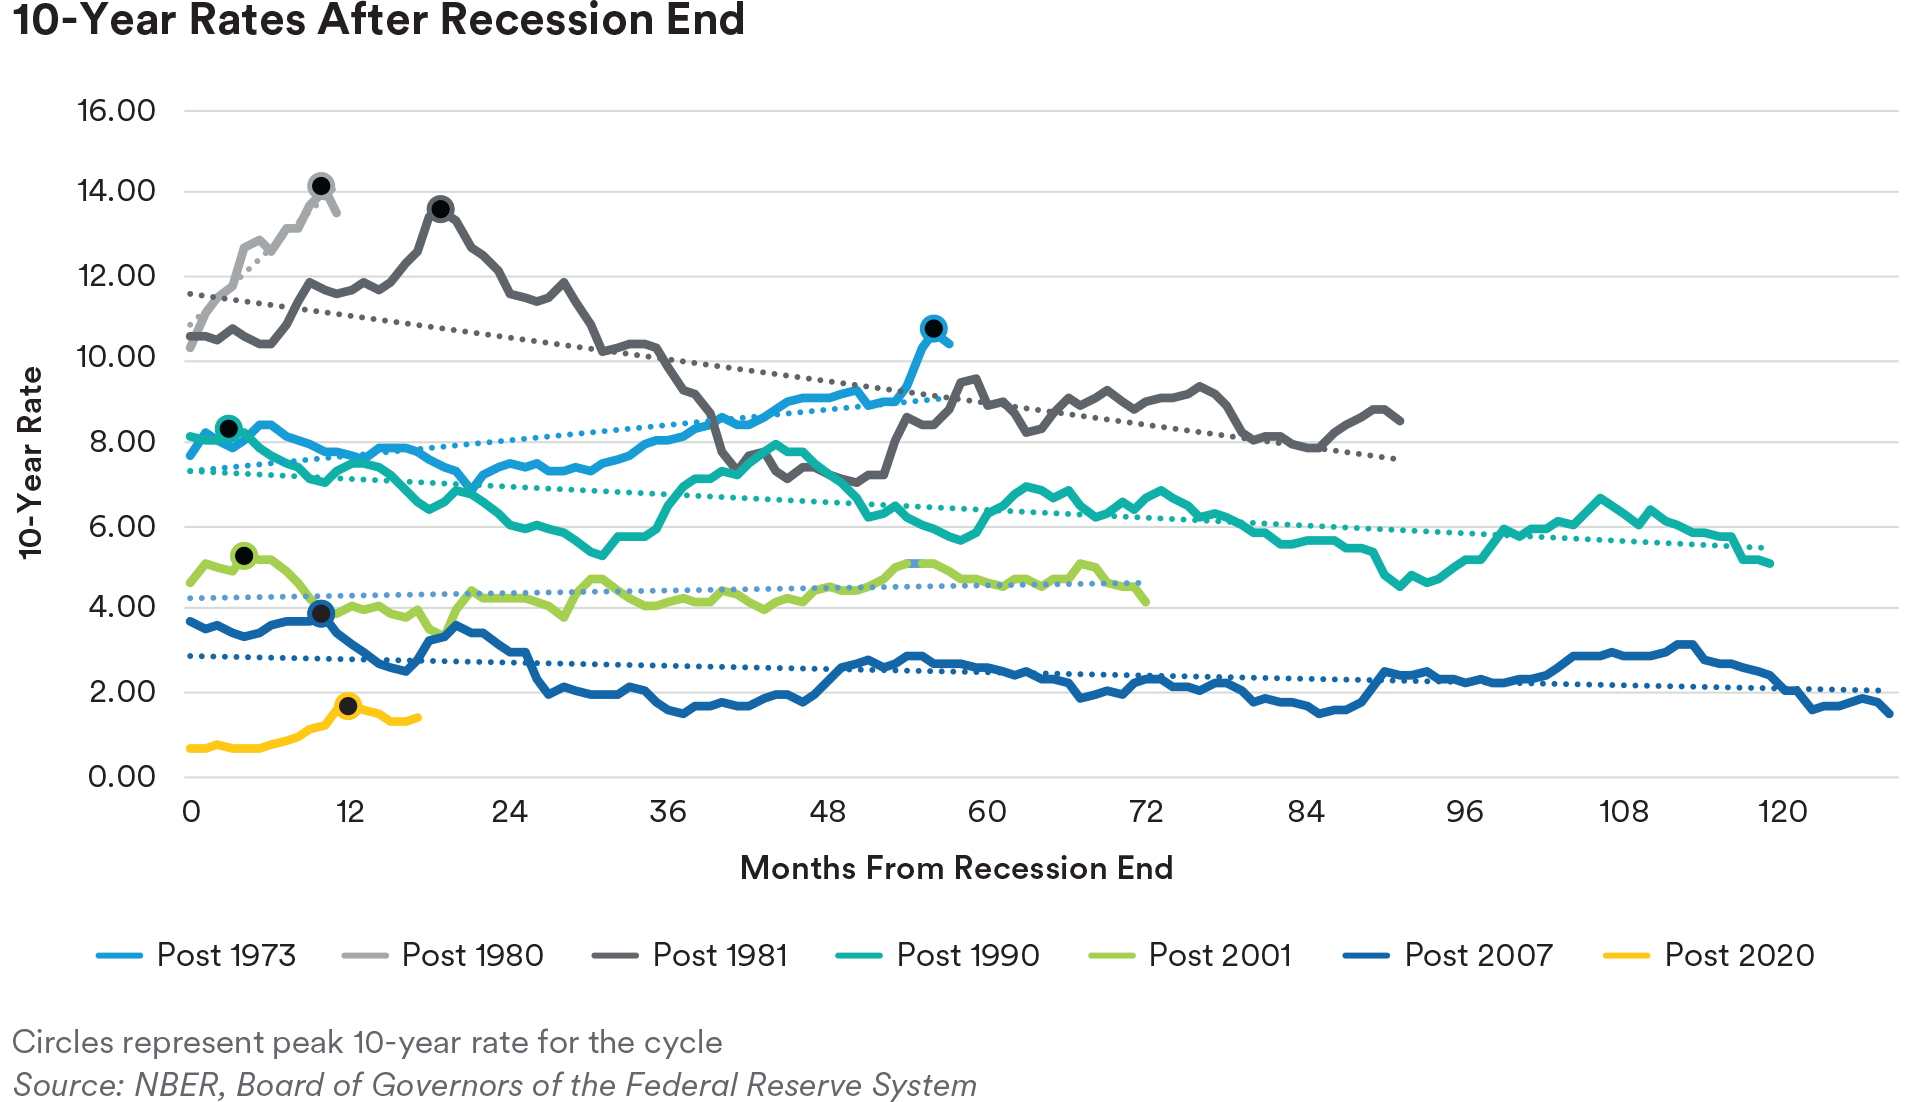 /></figure></p><!-- /wp:image --><!-- wp:paragraph --><p><p>Economically, it makes sense for rates to be relatively high at the beginning of the cycle. High real rates, and a steep yield curve in particular, denote optimism about the future. Relatedly, the yield curve tends to steepen early in the recovery as yields generally rise ahead of Fed tightening. This is effectively the opposite of the yield curve inversion that takes place toward the end of the business cycle.</p></p><!-- /wp:paragraph --><!-- wp:paragraph --><p><p>Earlier this year in March, the 10-year yield peaked at 1.74%. We believe this level will be surpassed in the coming year with the 10-year rising above 2.0% in 2022. There are a few reasons for this view. First, the Fed is deliberately permitting a higher inflation rate this cycle; letting inflation run hotter than usual may introduce a new dynamic that delays the cycle high. Second, rates are currently on an increasing path with the decline of the delta variant wave, and this may continue as virus optimism improves. Finally, the post-recession growth path has been particularly troubled, particularly by supply chain and labor market problems. The relief from these imbalances—which we expect to take place in the back half of 2022—could create a renewed optimism about the overall economic trajectory.</p></p><!-- /wp:paragraph --><!-- wp:paragraph --><p><p>These are all compelling reasons for the 10-year to drift higher into 2022. However, there are also many compelling reasons why we believe the peak in rates will take place in 2022 and not in 2023 as consensus forecasts suggest. We believe it is wise to pay attention to the patterns of past business cycles that we outlined and note the cycle peak for rates.</p></p><!-- /wp:paragraph --><p><!-- wp:paragraph {